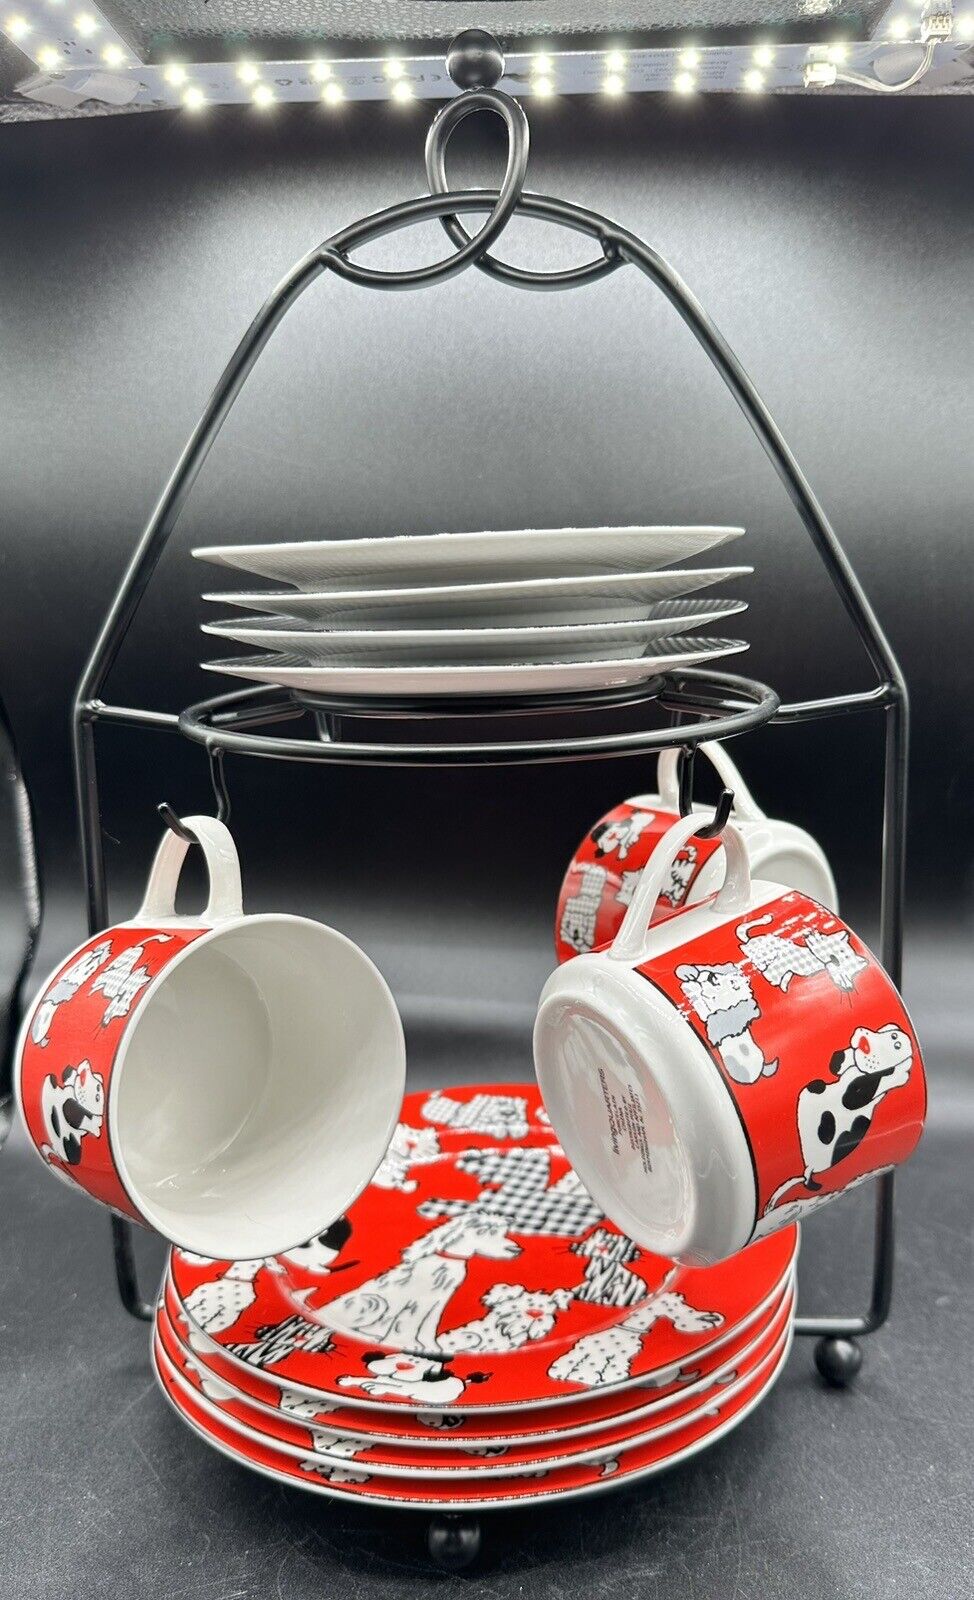 Dogs & Cats Plates Cups Set Red & Black Kitschy Living Quarters By Carson Pirie